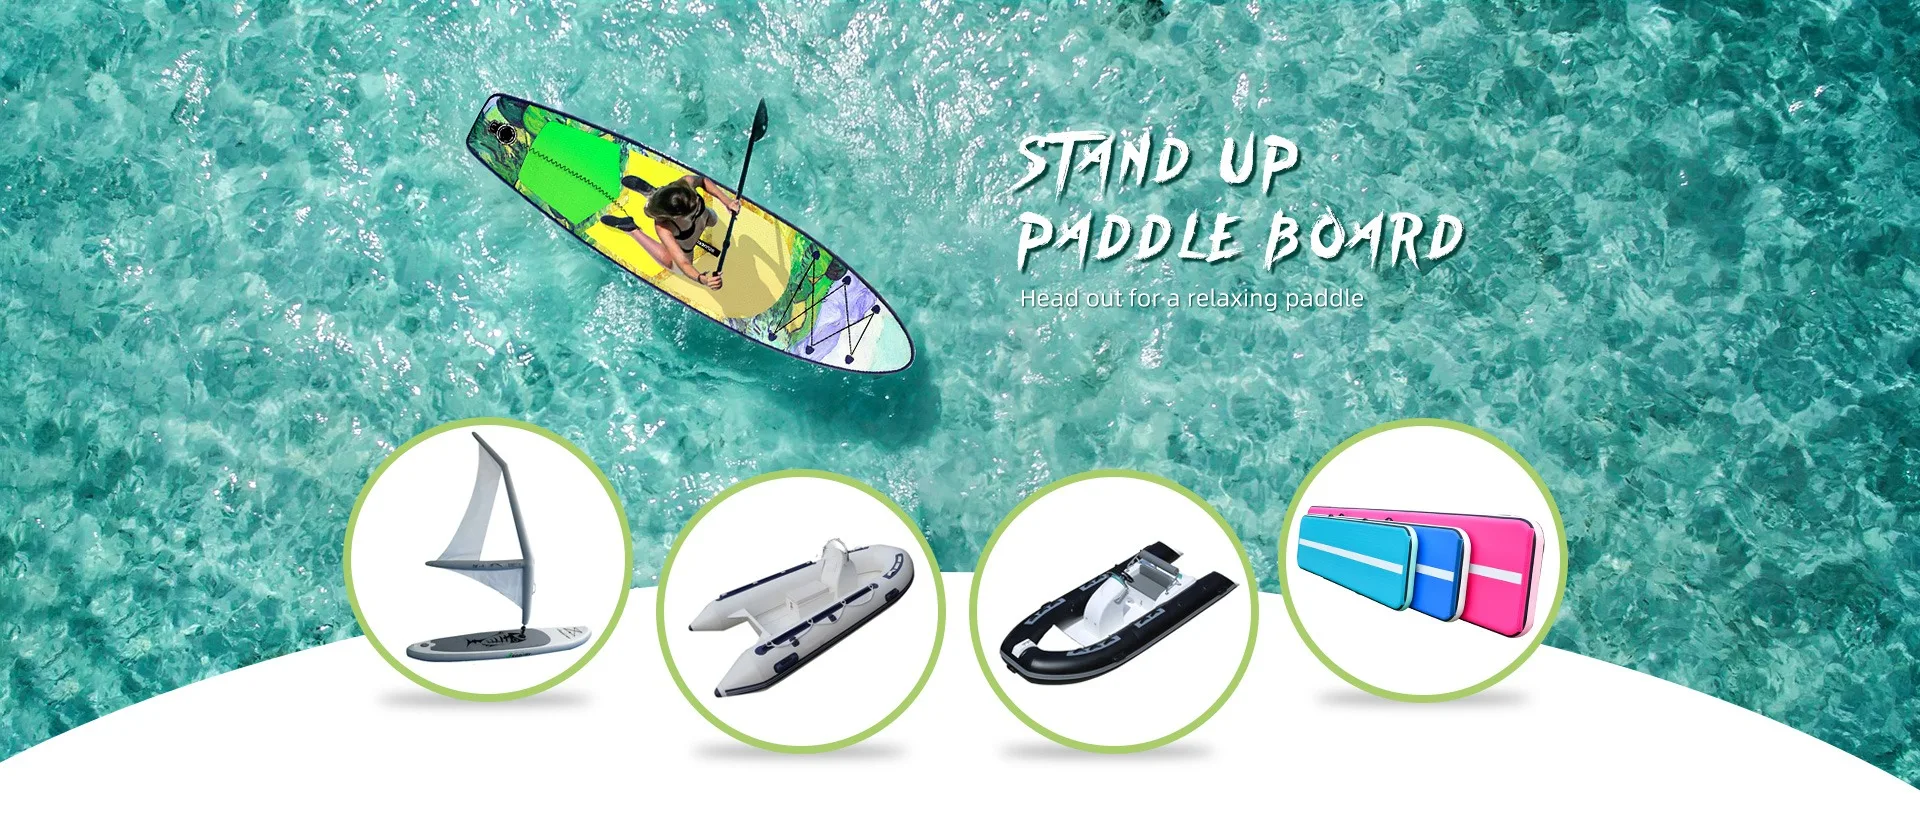 Weihai Blue Bay Outdoor Product Co., Ltd. - Inflatable Paddle Board ...